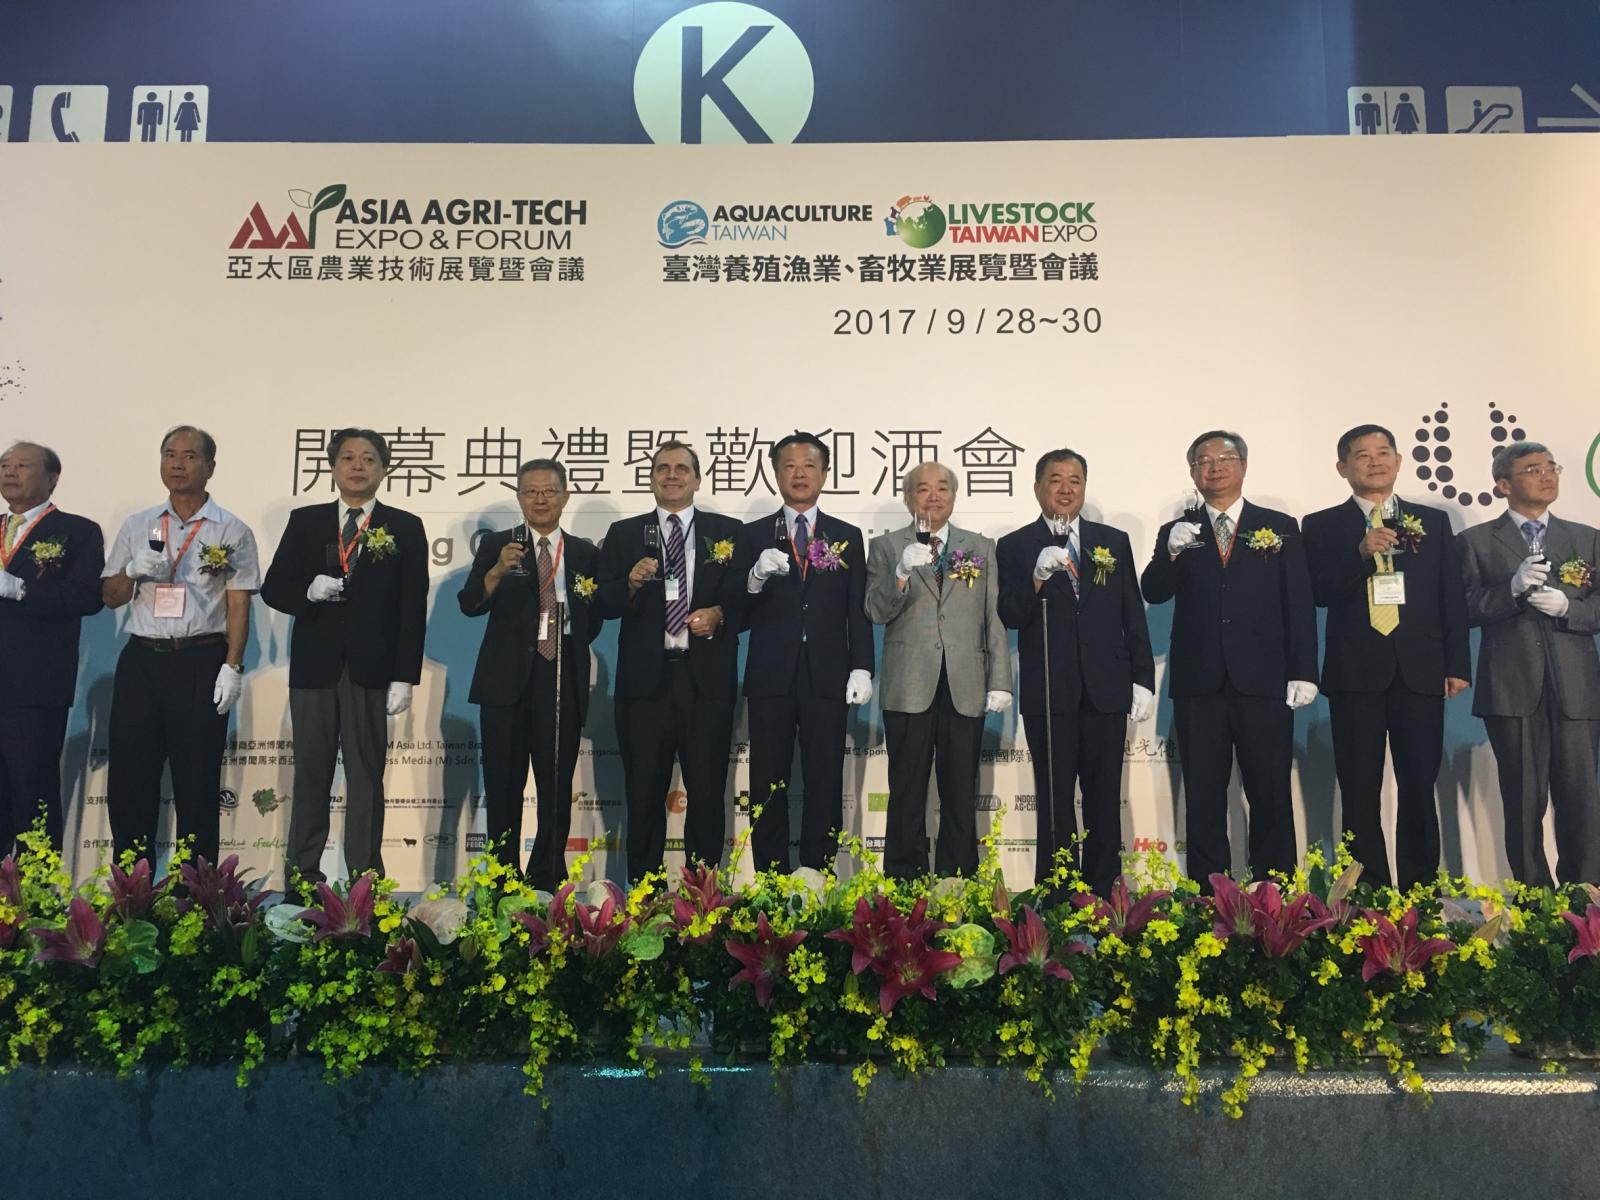 2017 Asia Agri-tech Expo & Forum opening ceremony